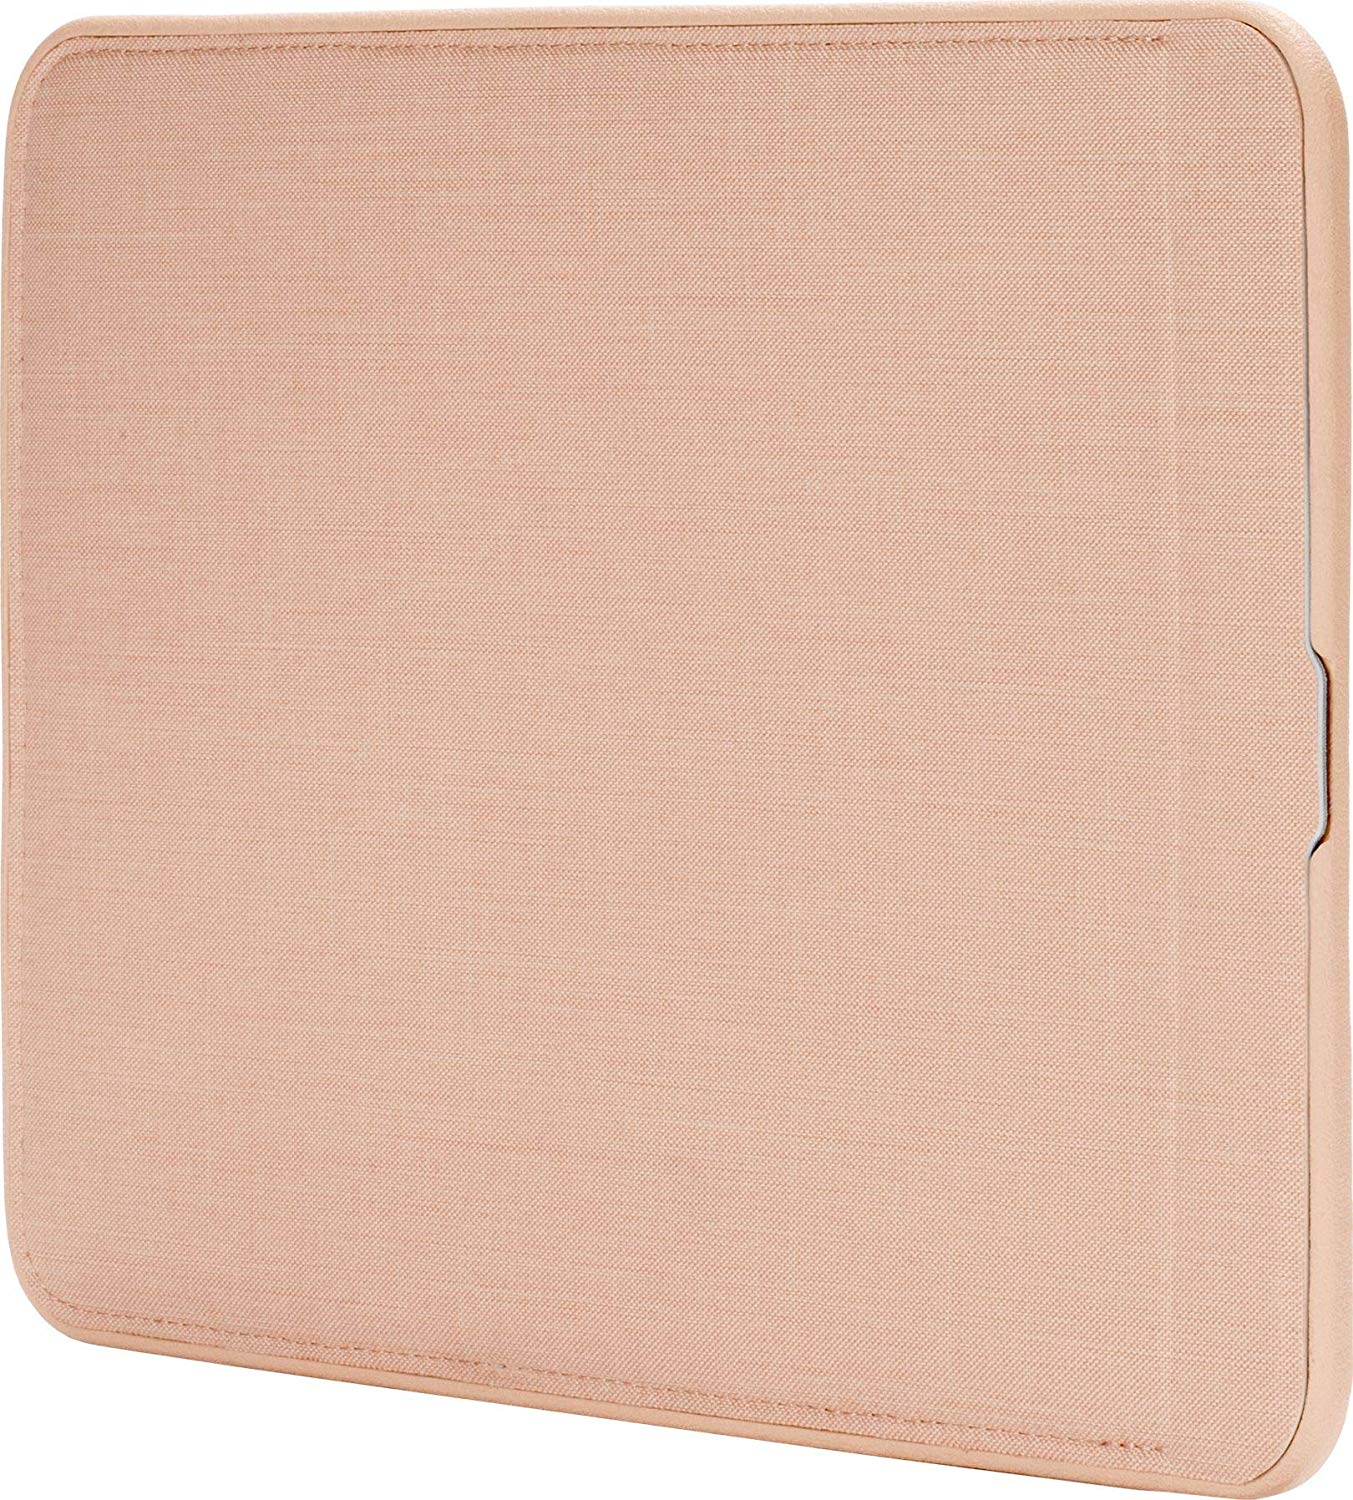 Incase - ICON Sleeve for 13.3 Inch Apple MacBook Pro - Blush Pink